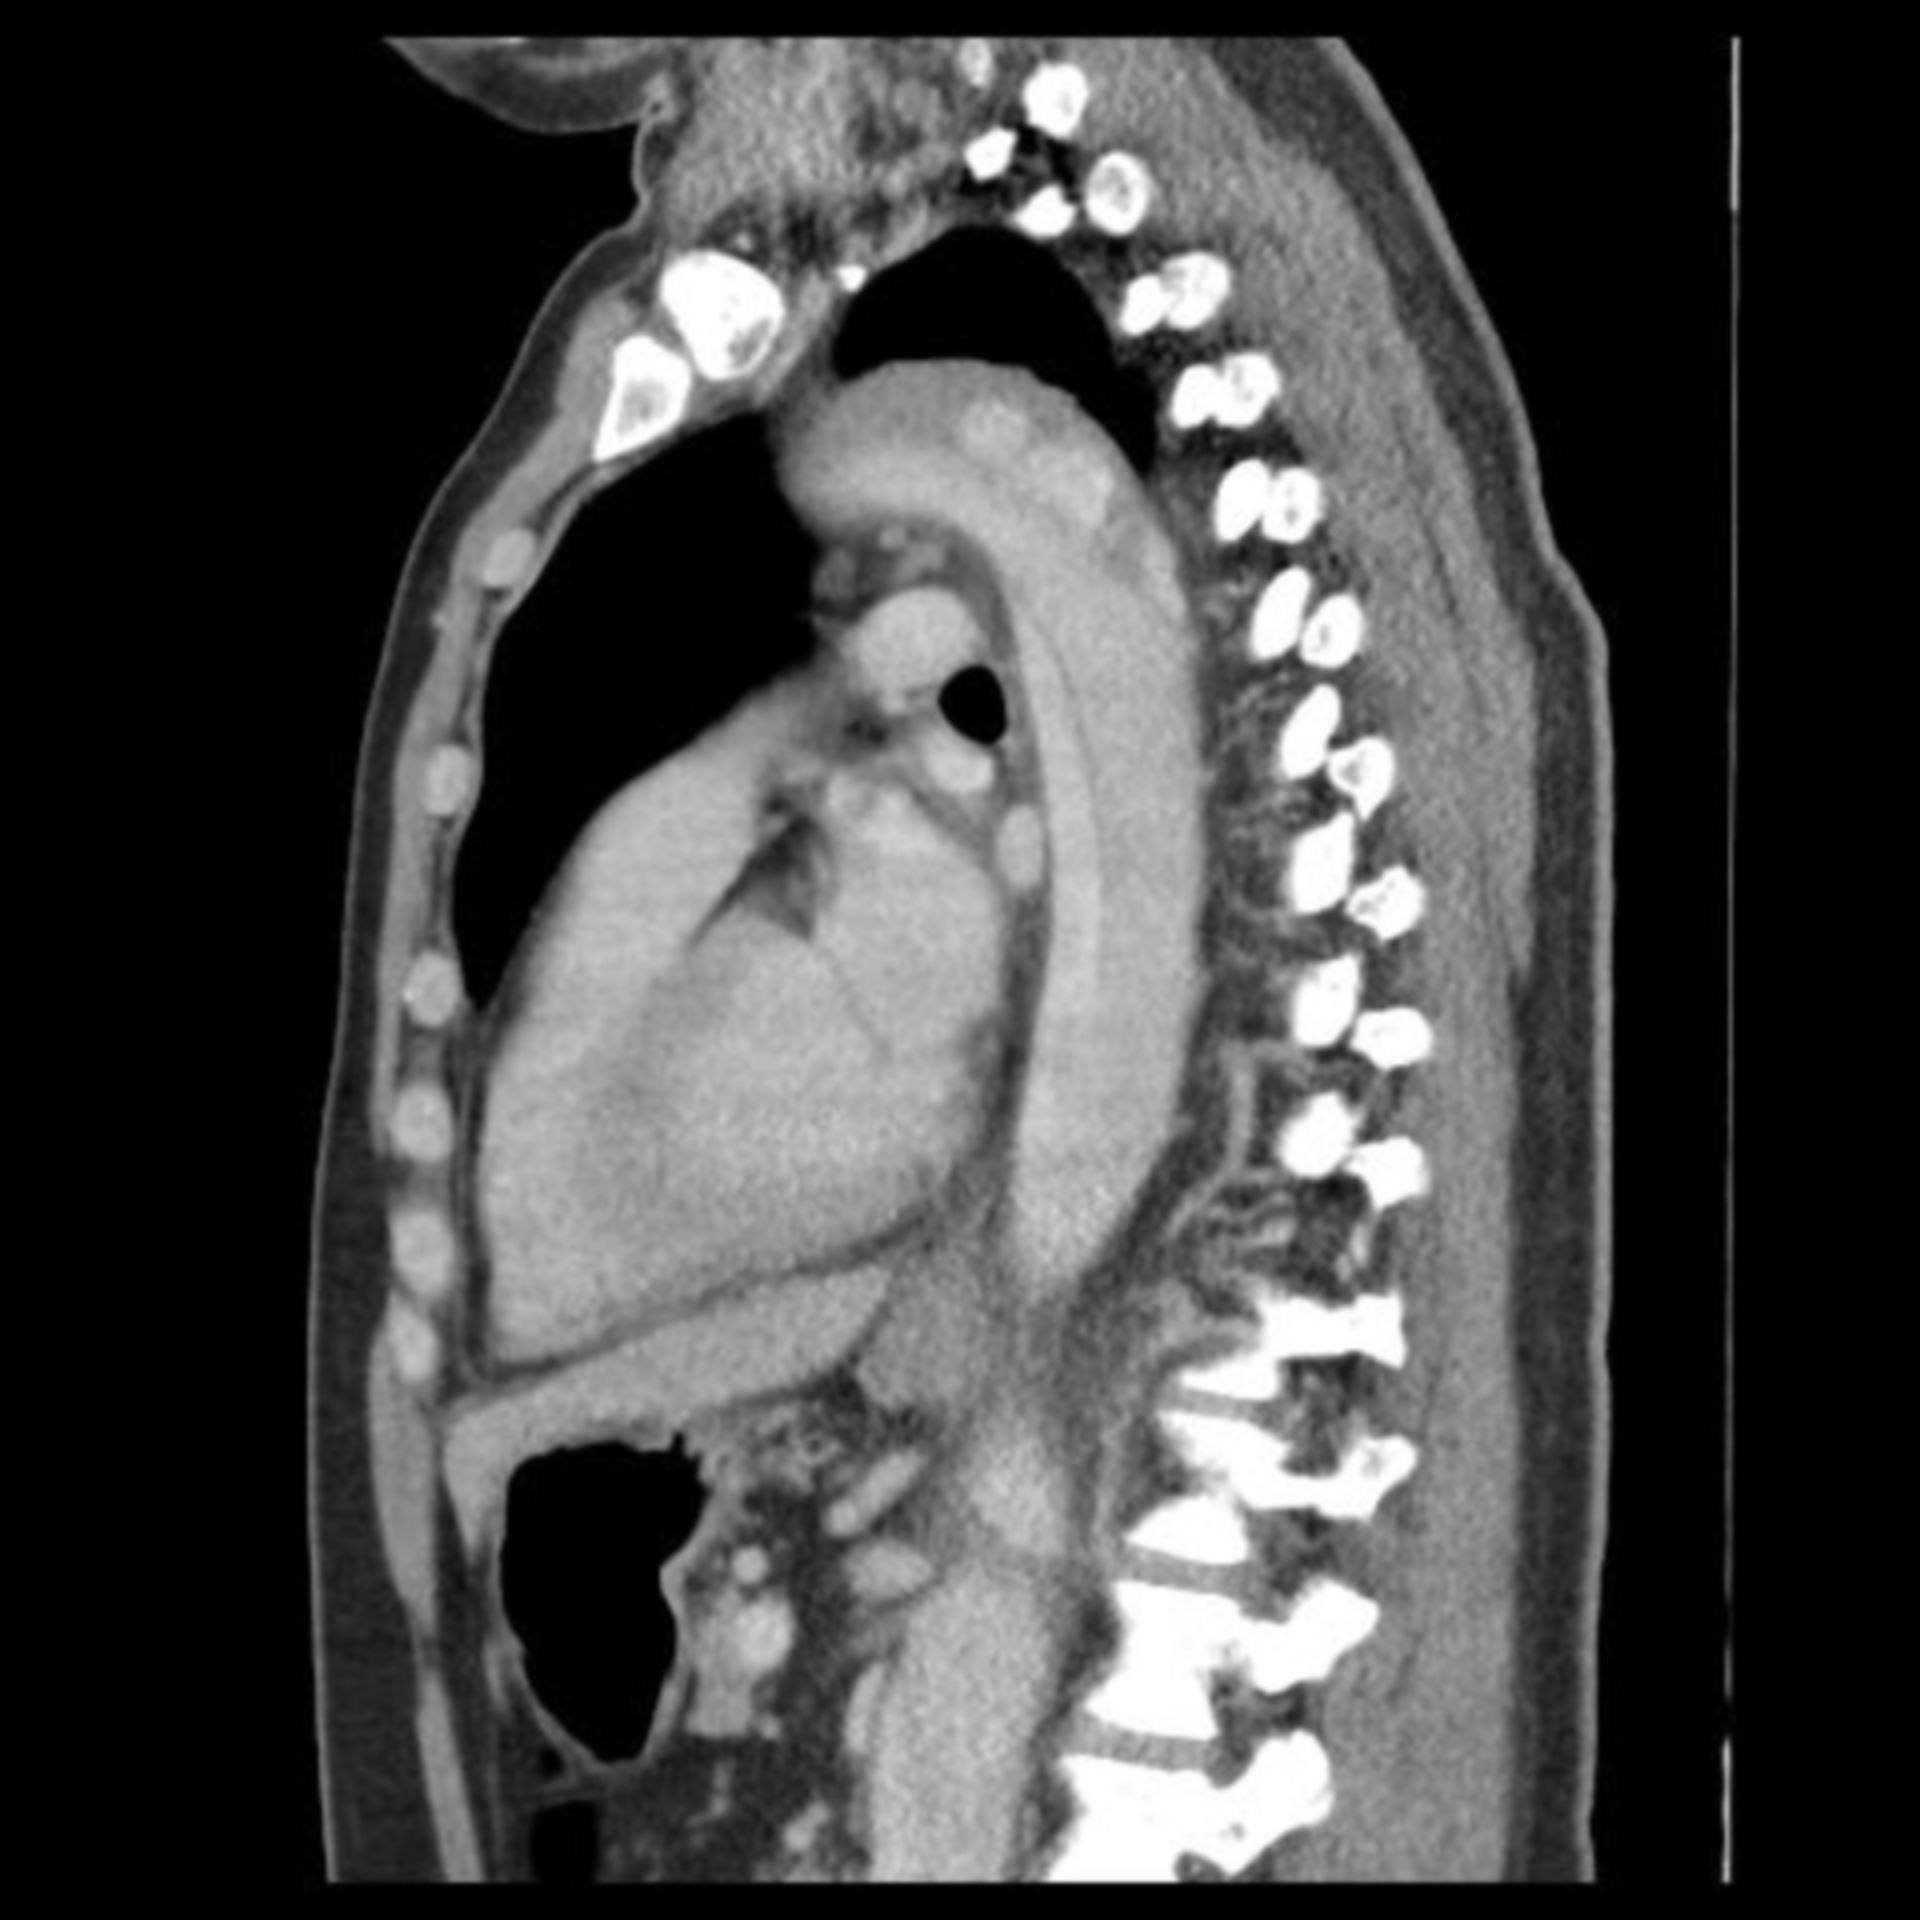 Long-ranging aortic dissection